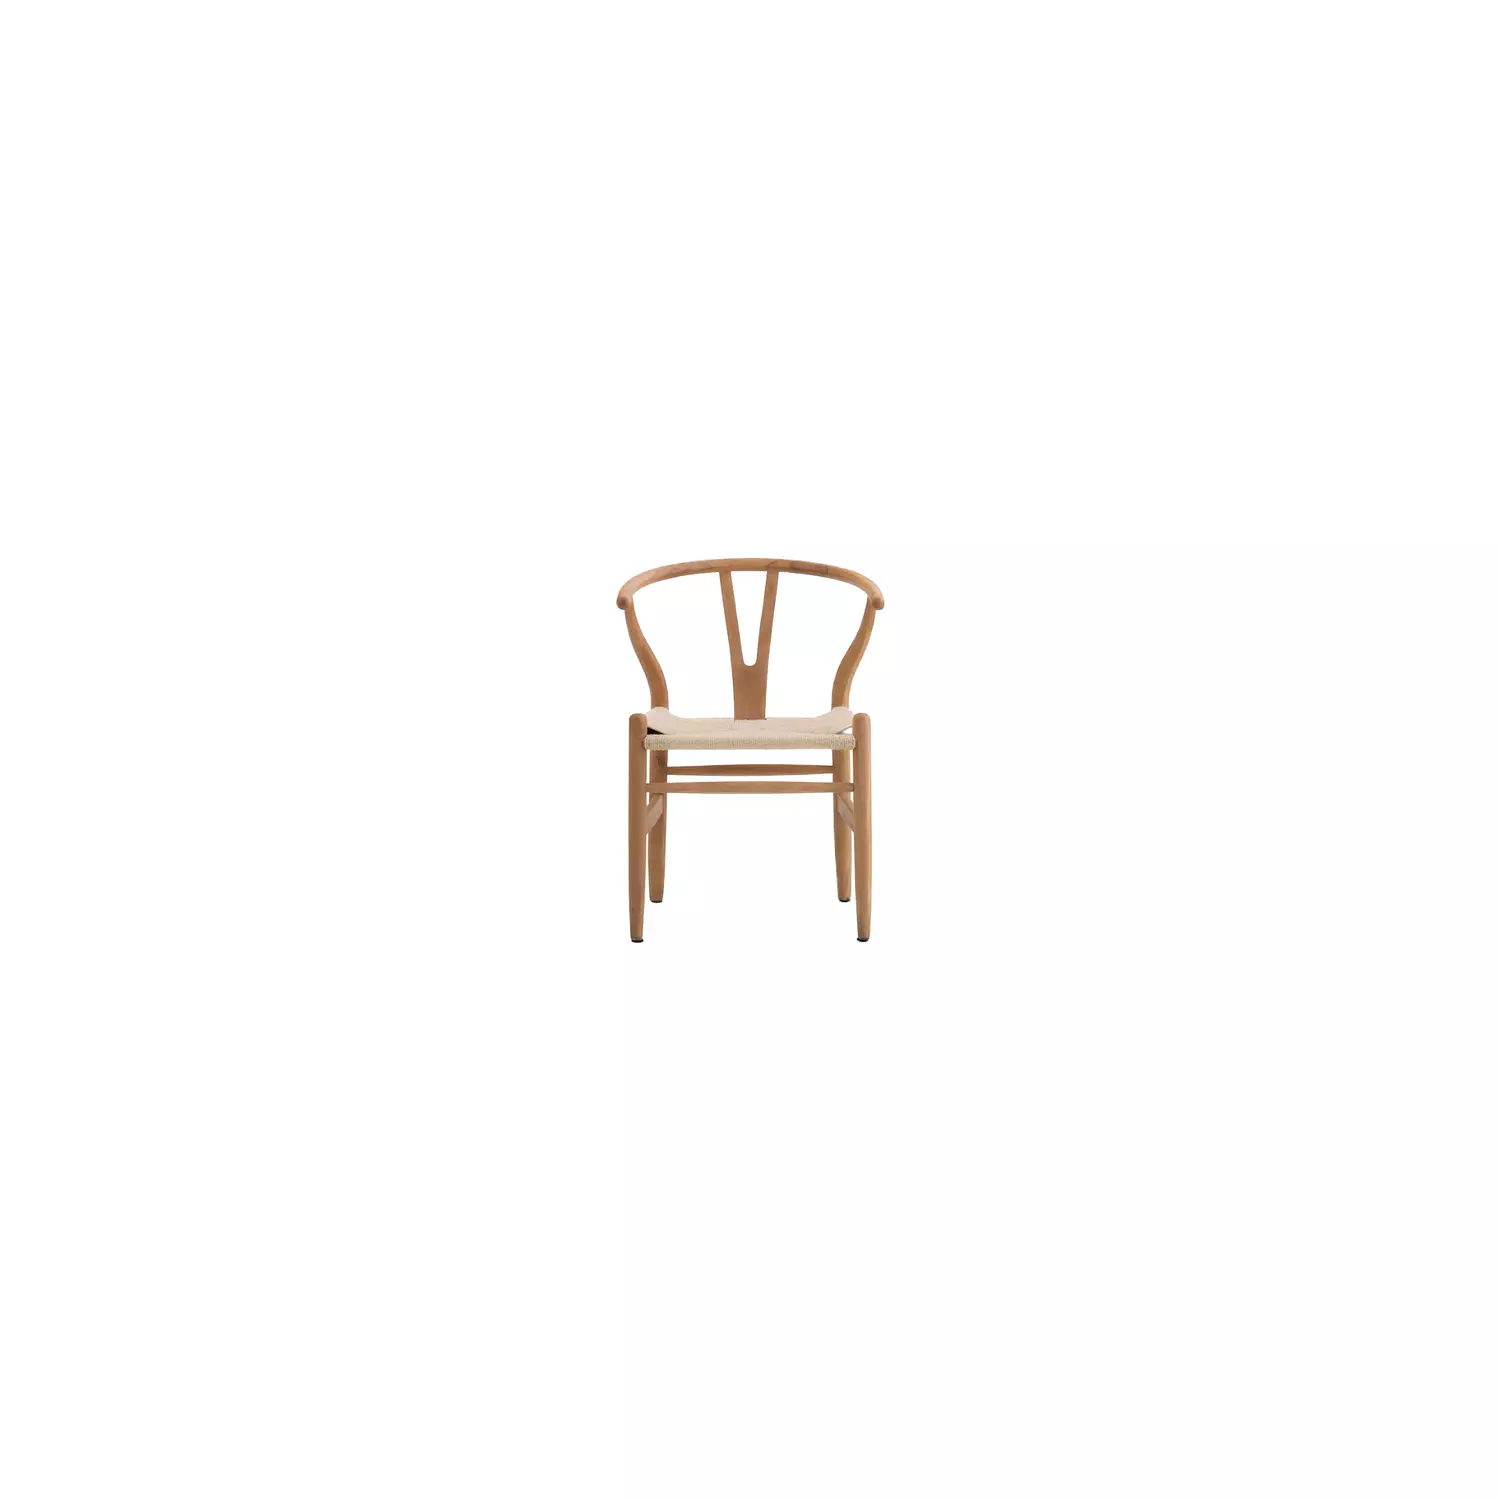 WISHBONE CHAIR hover image